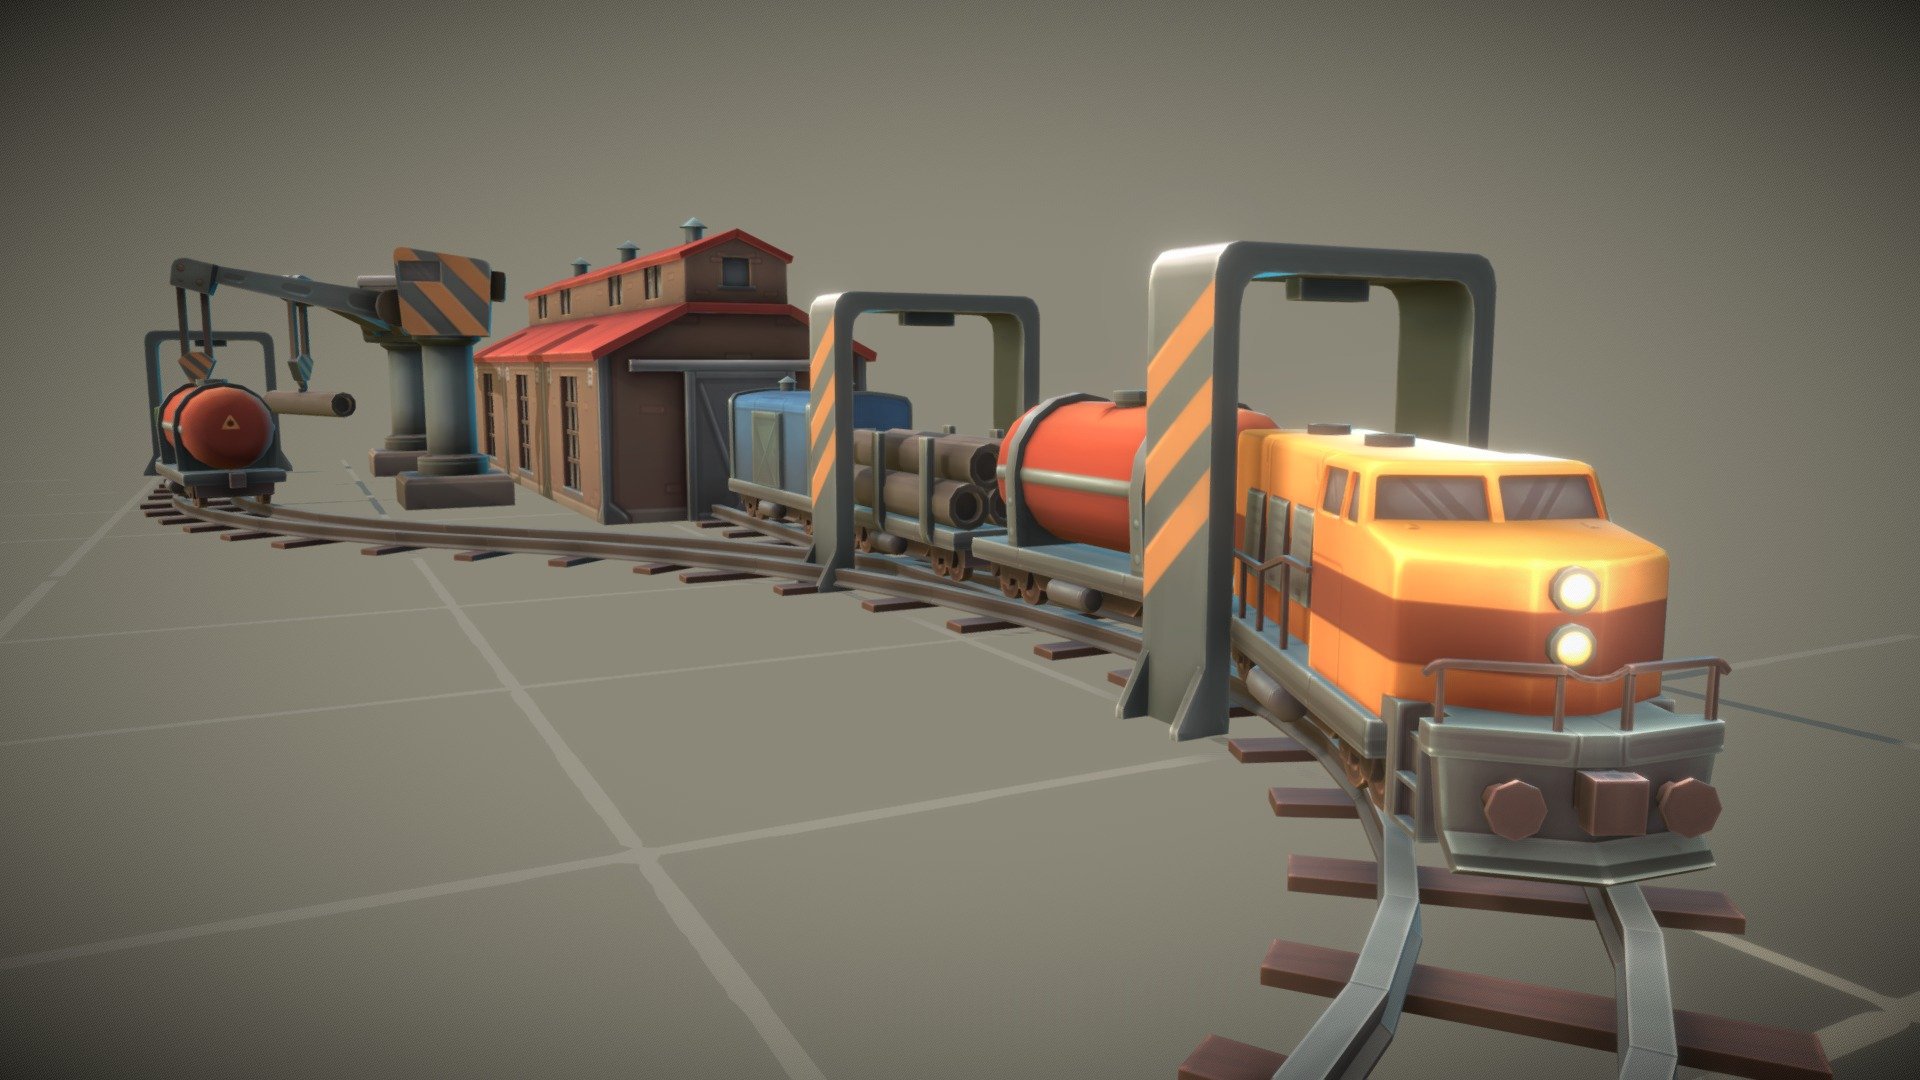 Cube train station from Polysquid Studios!
Soon, this pack will be available on Unity asset store!
For more assets like this, visit our webpage: https://polysquid.com/ - Cube Train Station - Buy Royalty Free 3D model by PolySquid (@PolySquid_Studios) 3d model